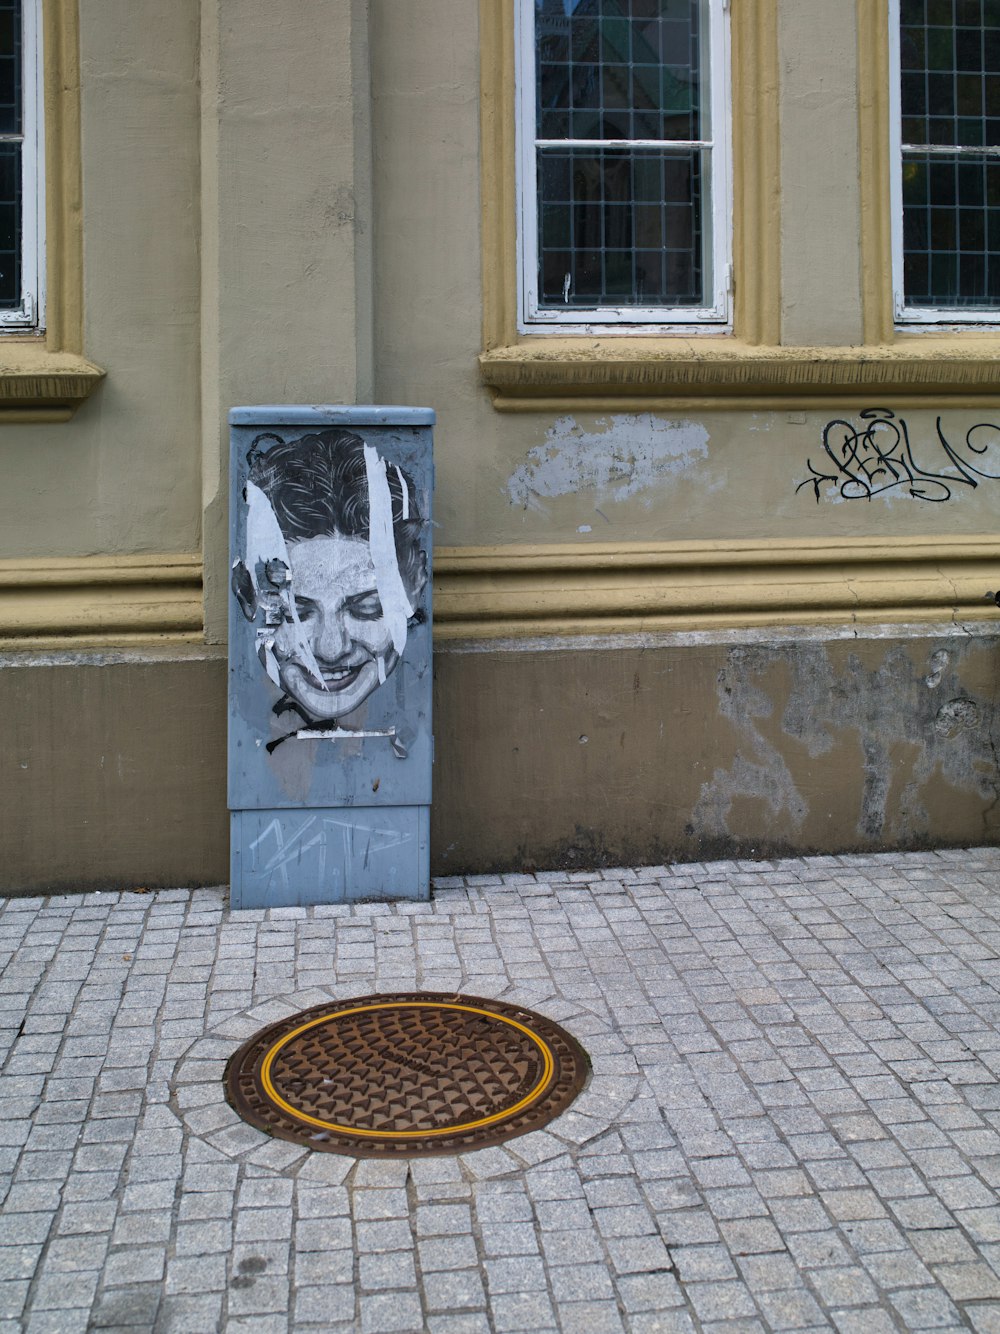 a picture of a man's face on the side of a building